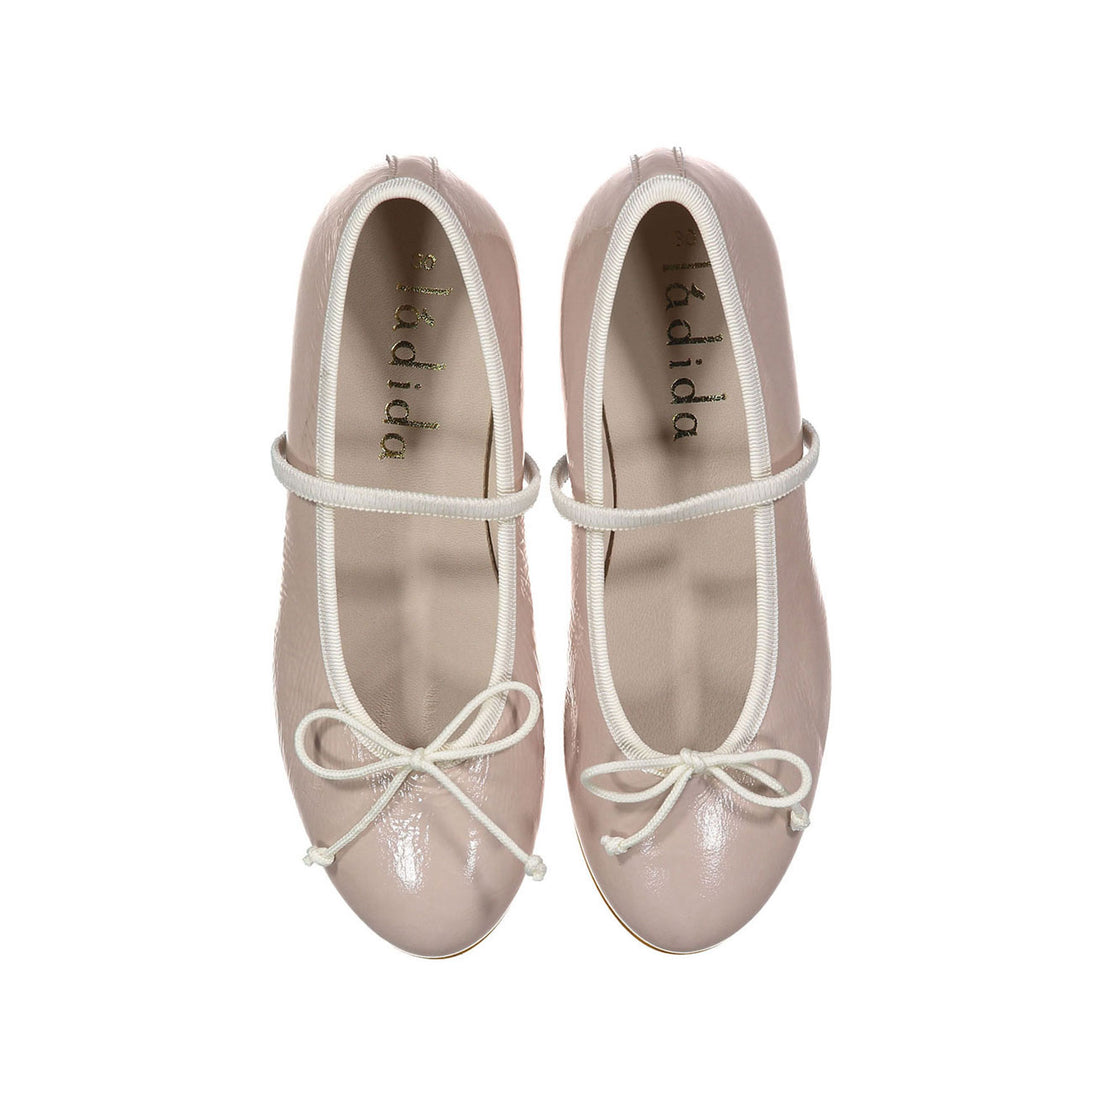 Ladida Oyster Strap Ballet Flats